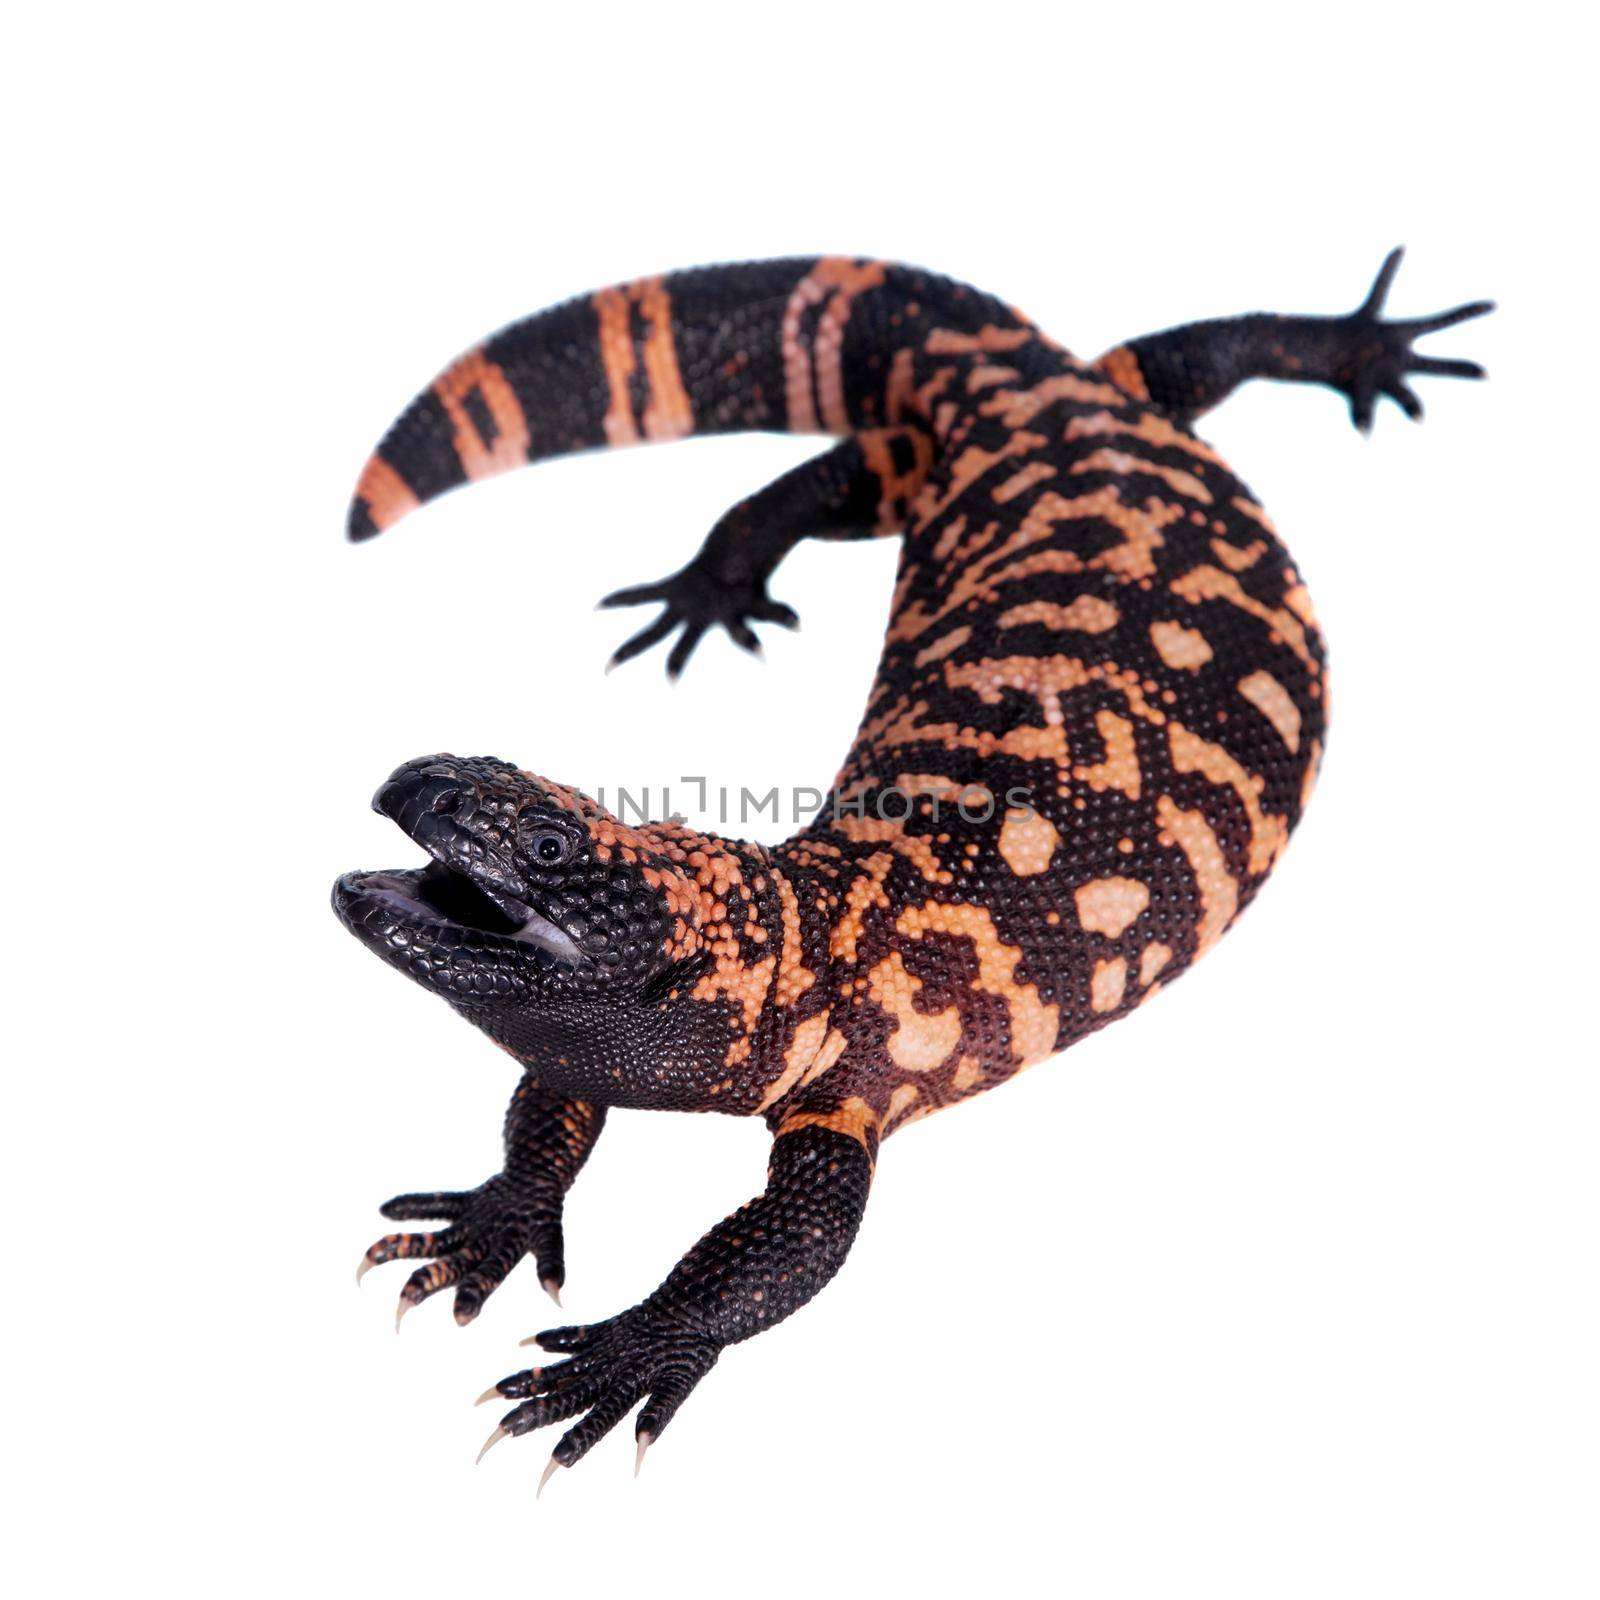 Gila Monster, Heloderma suspectum, isolated on white background